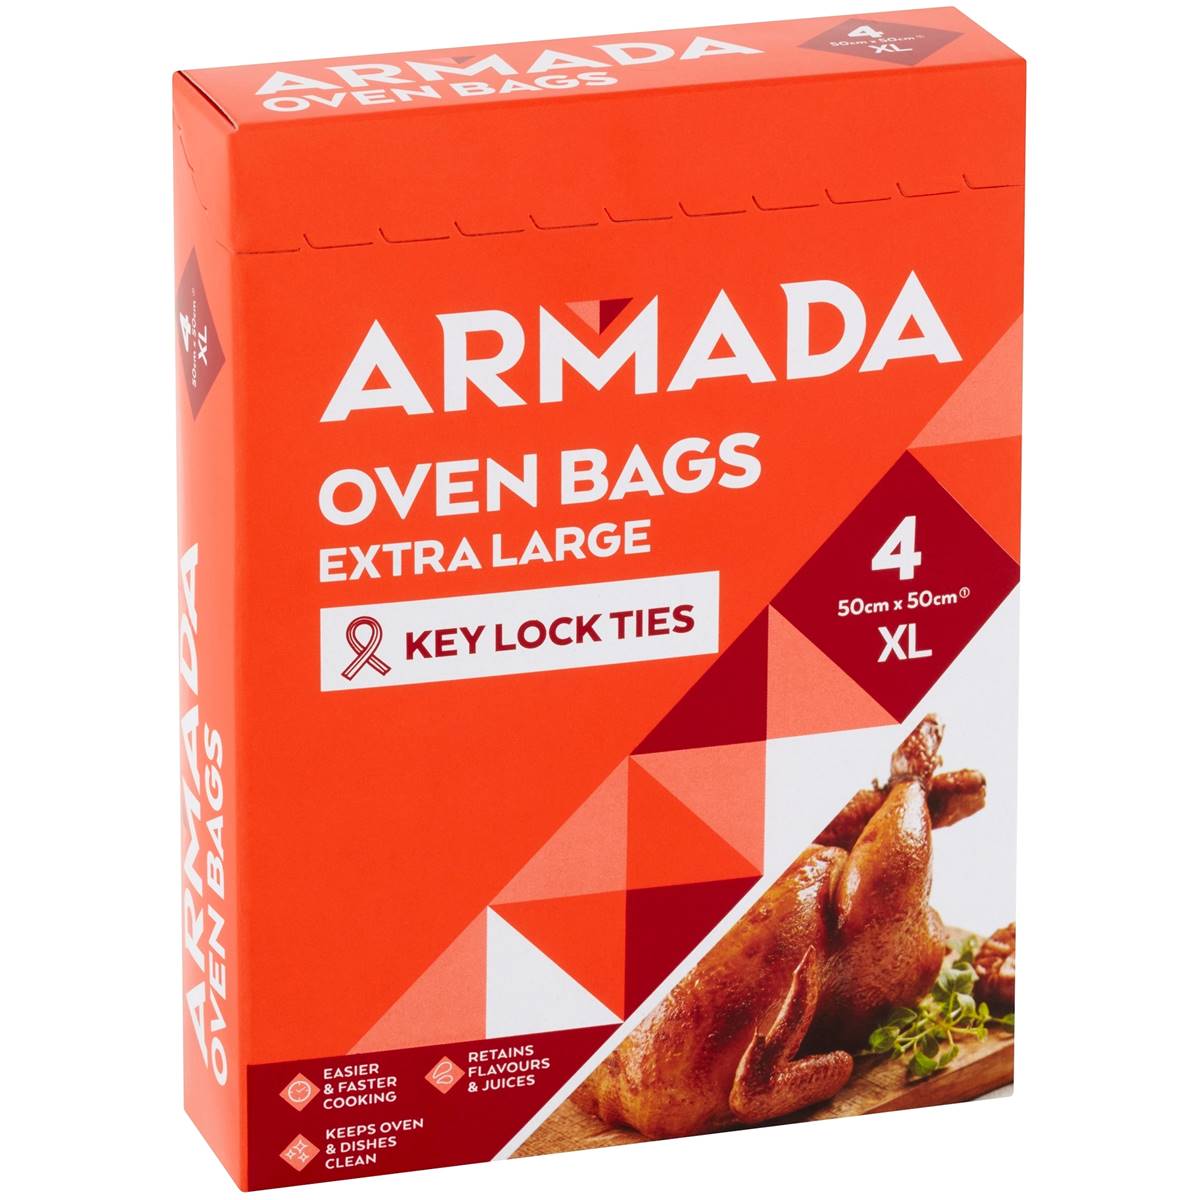 Armada Extra Large Oven Bags 4pk